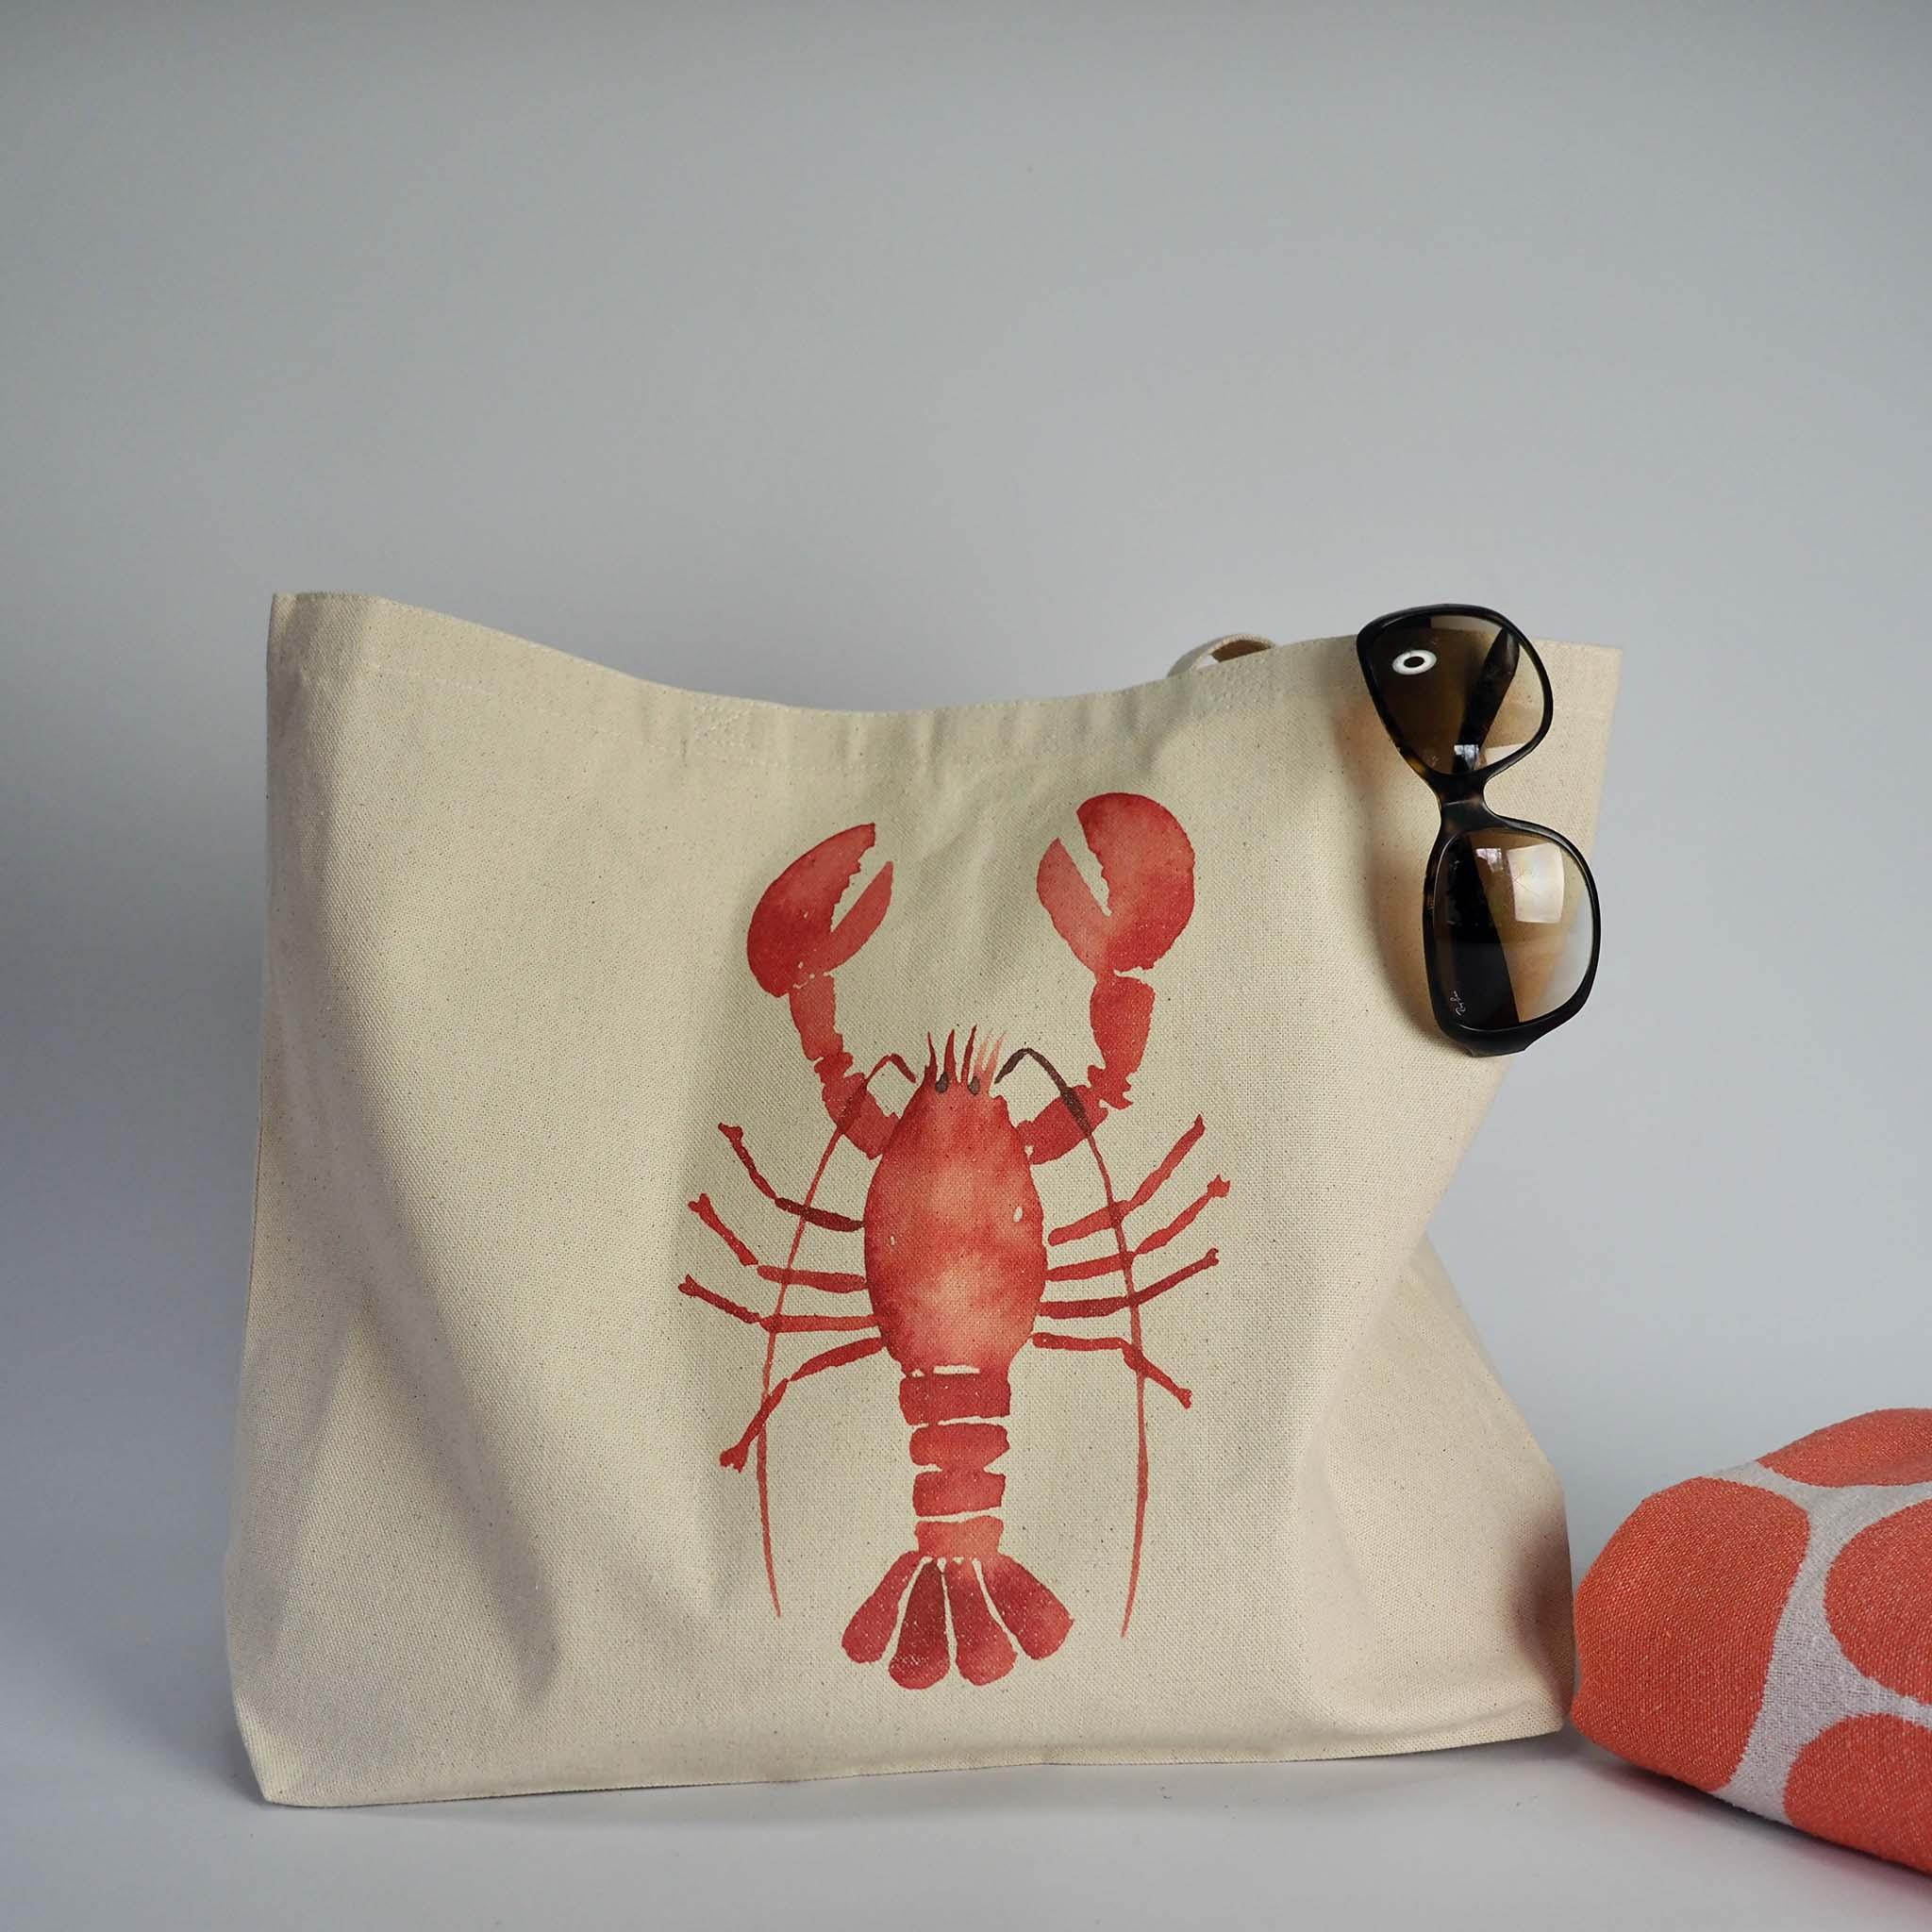 Beach ready with our XL Canvas tote bag and lobster design on the front, with sunglasses and coral spotty beach towel.